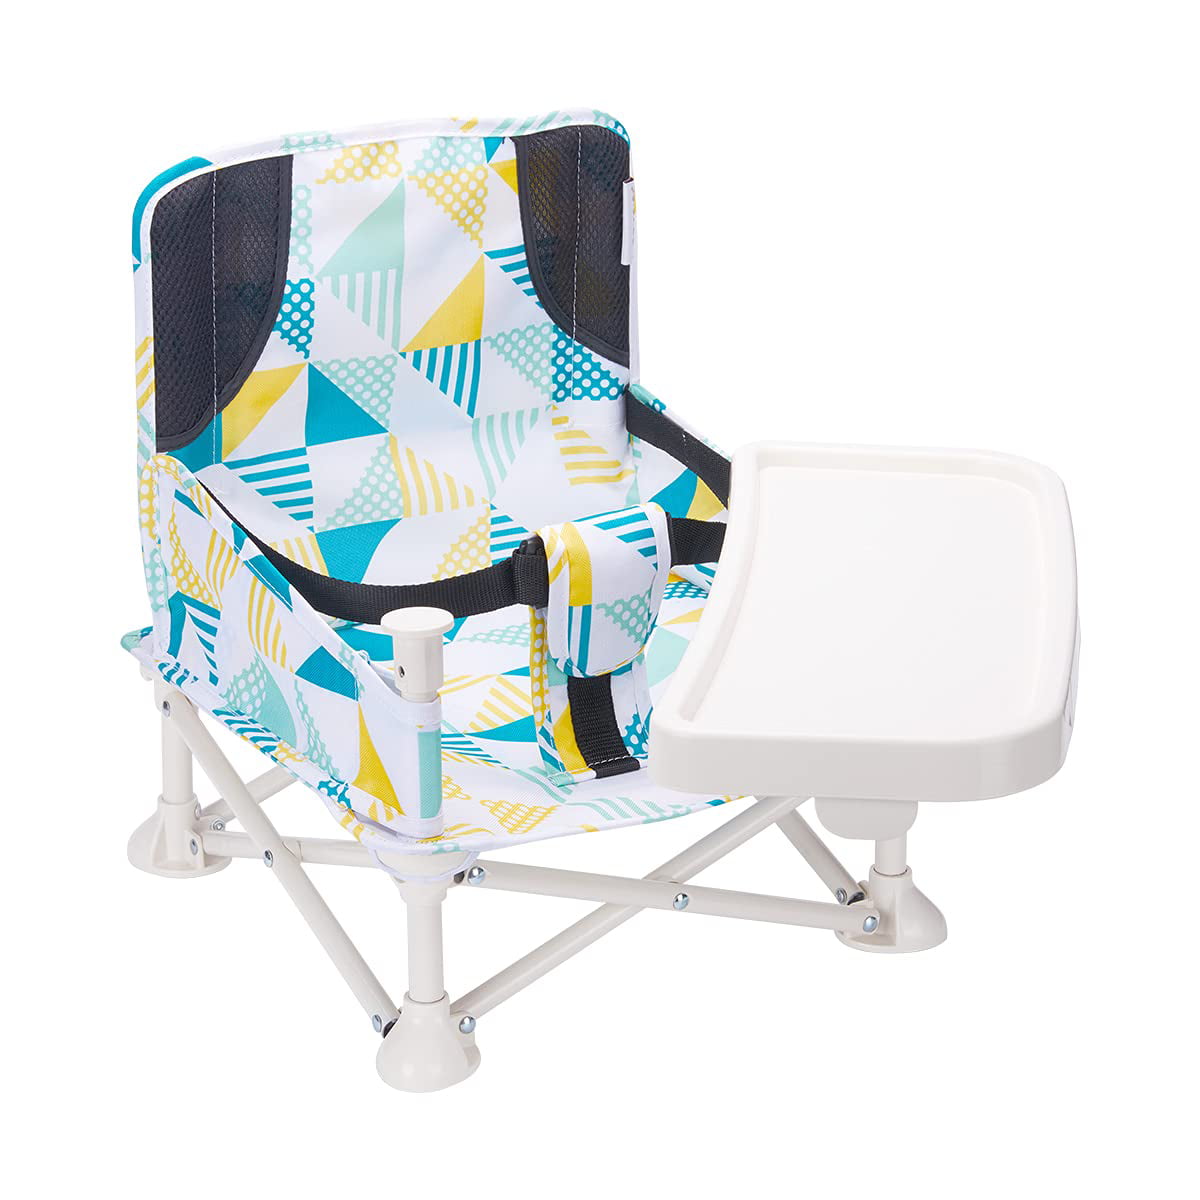 Teal VEEYOO Travel Booster Seat with Removable Tray Park Beach, Compact Folding Portable High Chair for Dining Camping 